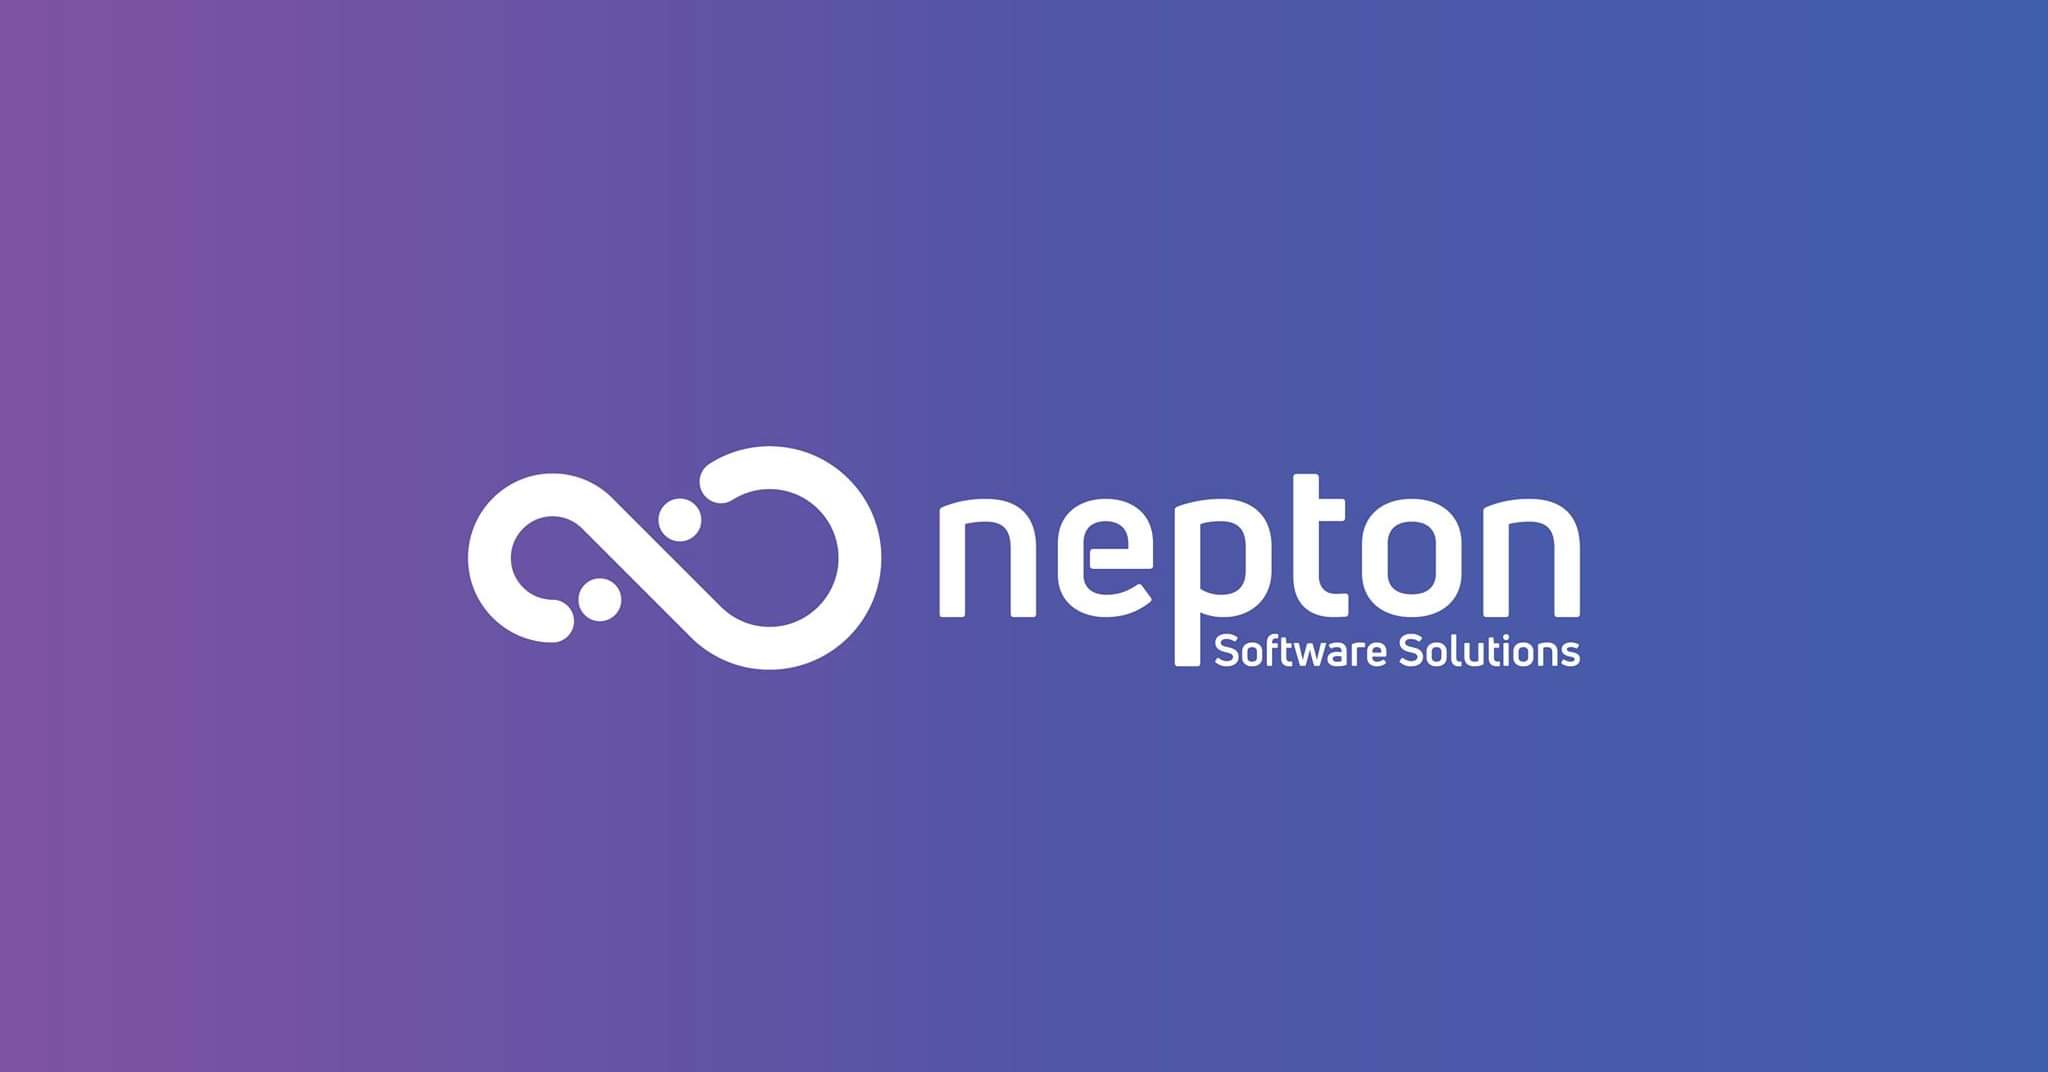 Nepton Software Solutions|Accounting Services|Professional Services